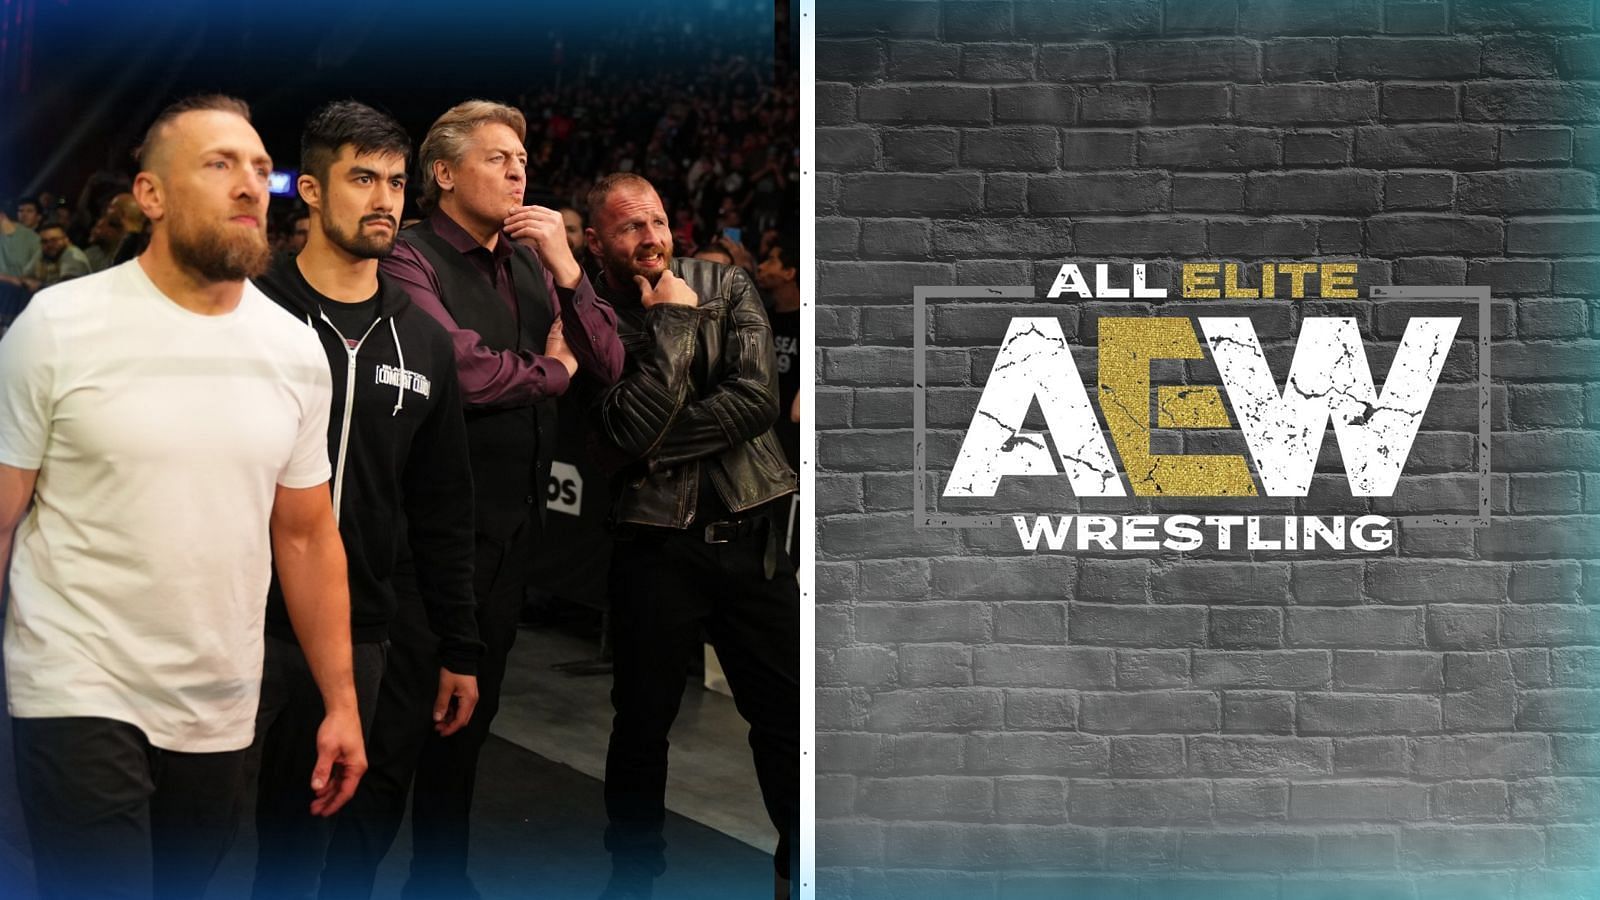 Blackpool Combat Club of AEW is managed by William Regal